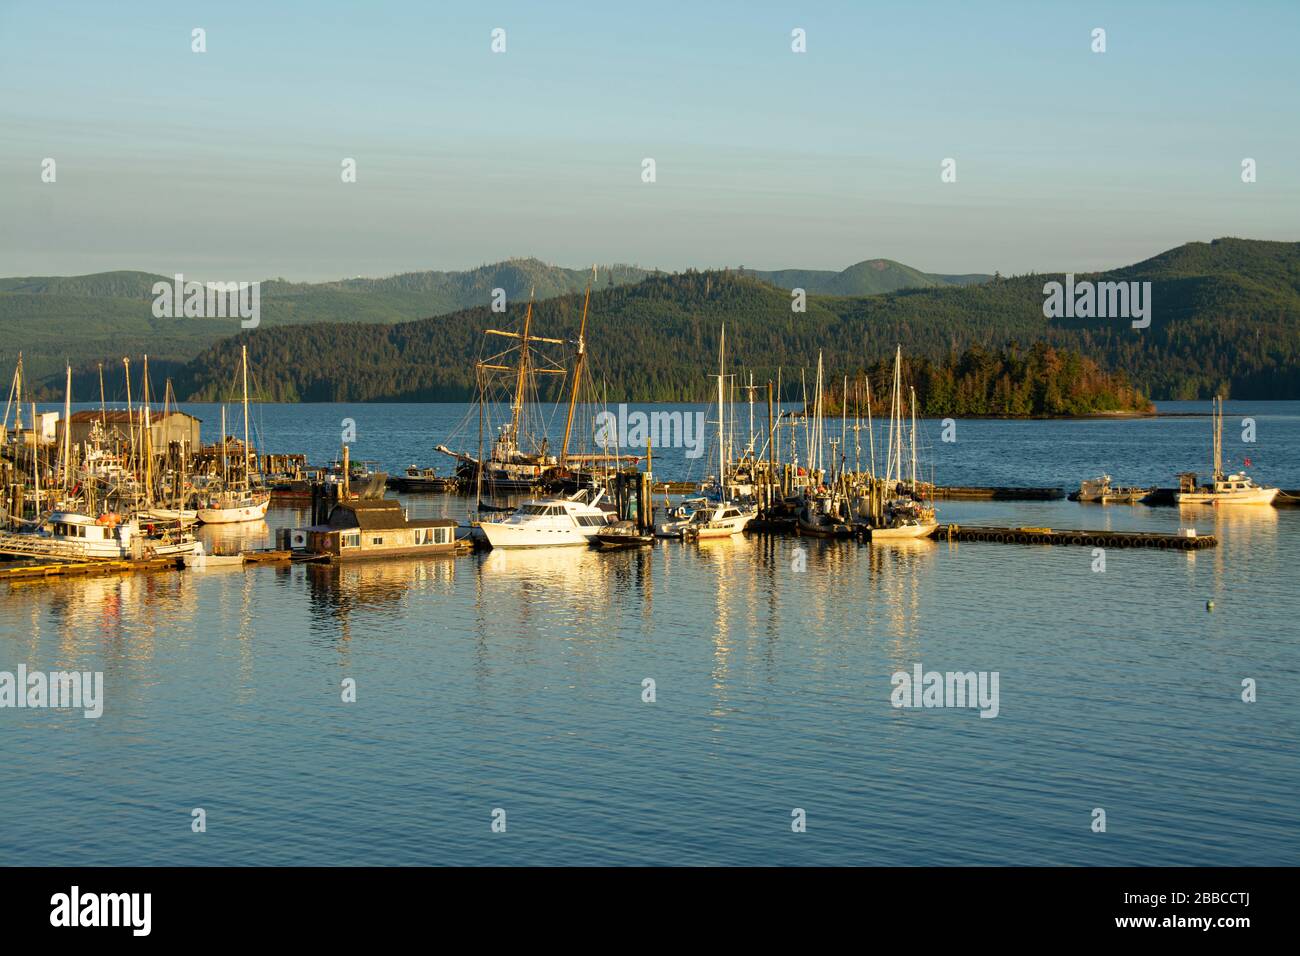 Fisherman's Wharf, Queen Charlotte City, Haida Gwaii, Formerly known as Queen Charlotte Islands, British Columbia, Canada Stock Photo